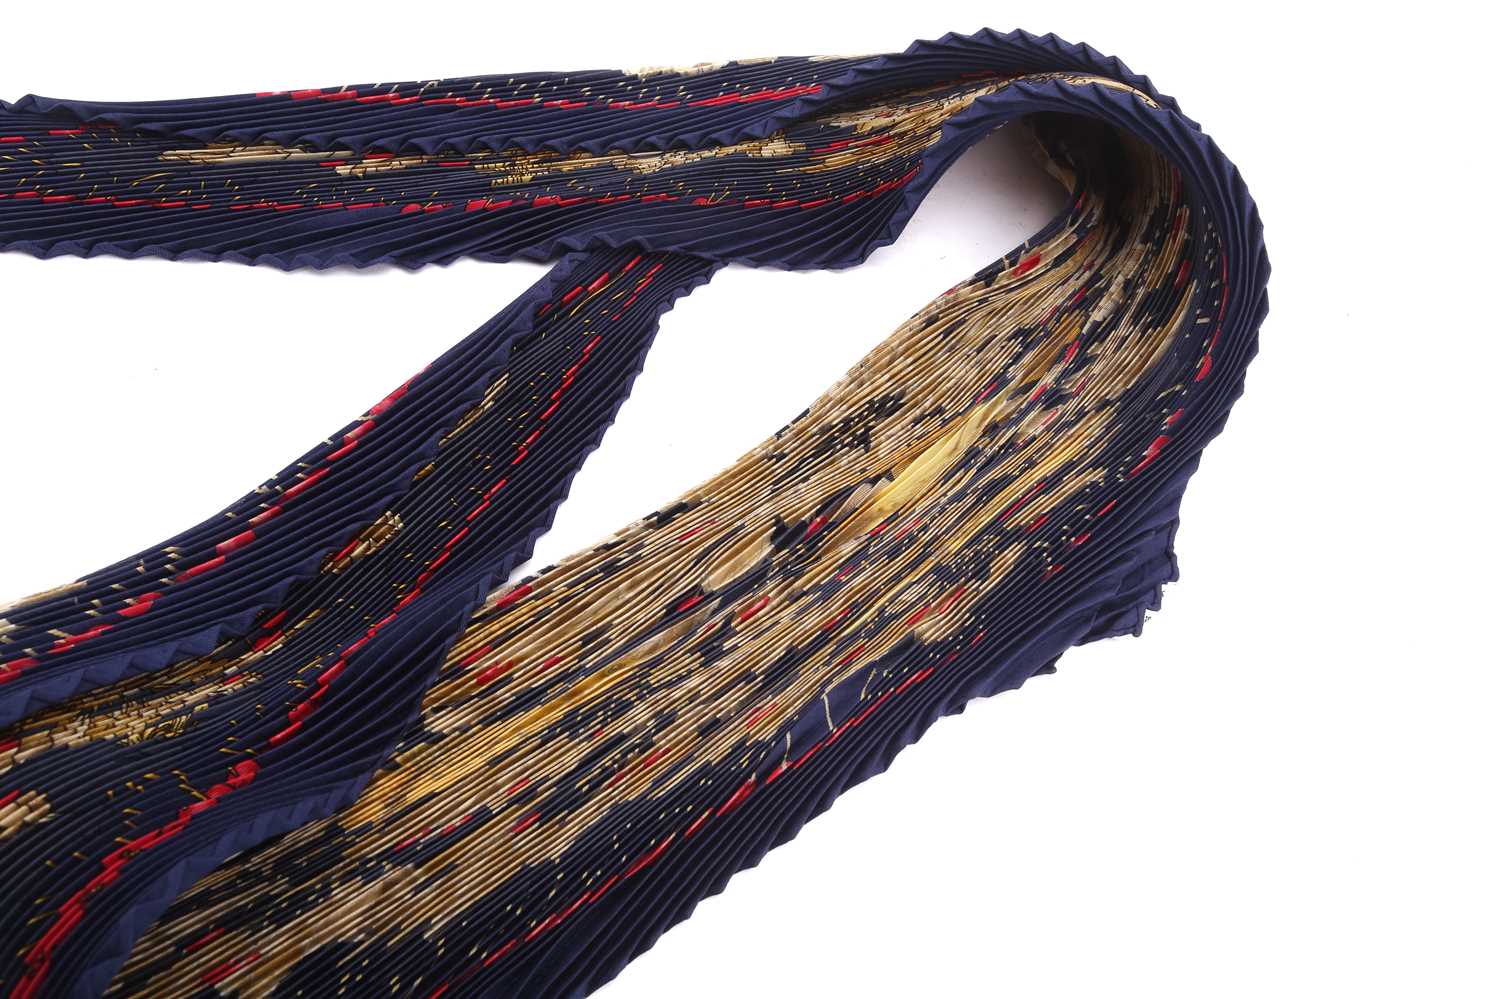 Hermès - 'Les Merises (Cherries)' silk pleated scarf in navy and gold colourway, illustrated with - Image 6 of 6